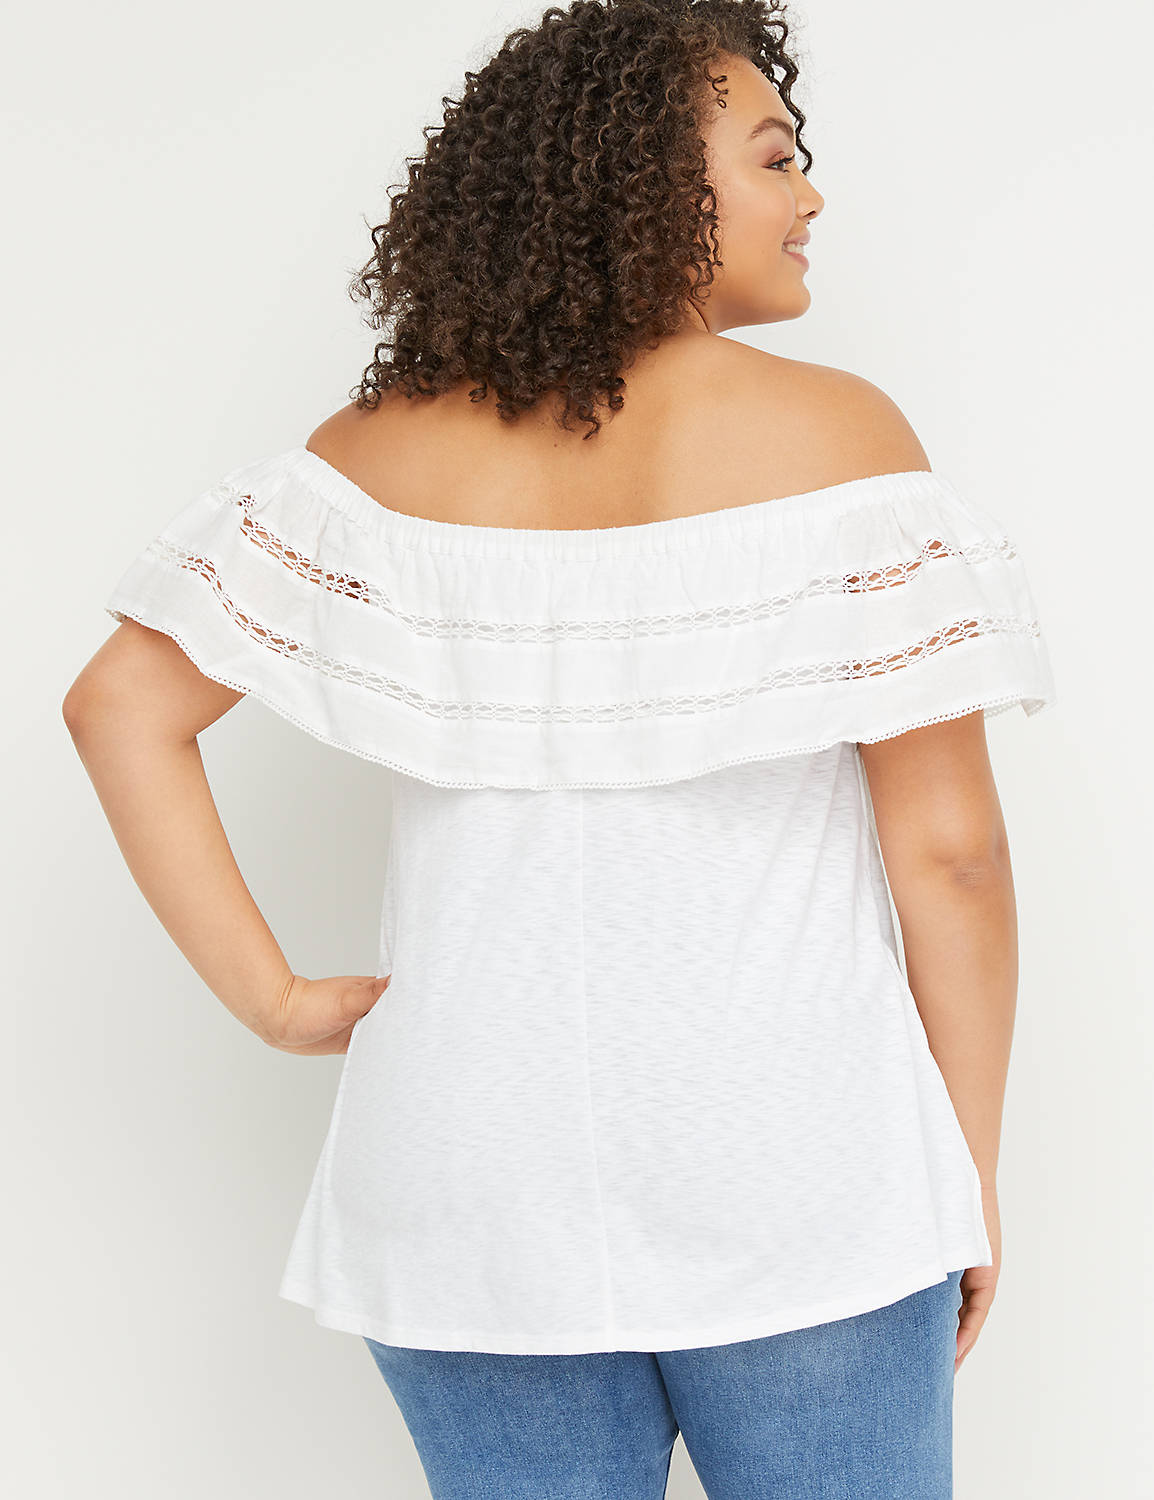 1103892 OTS Woven Mix Top:White 2008:22/24 Product Image 2